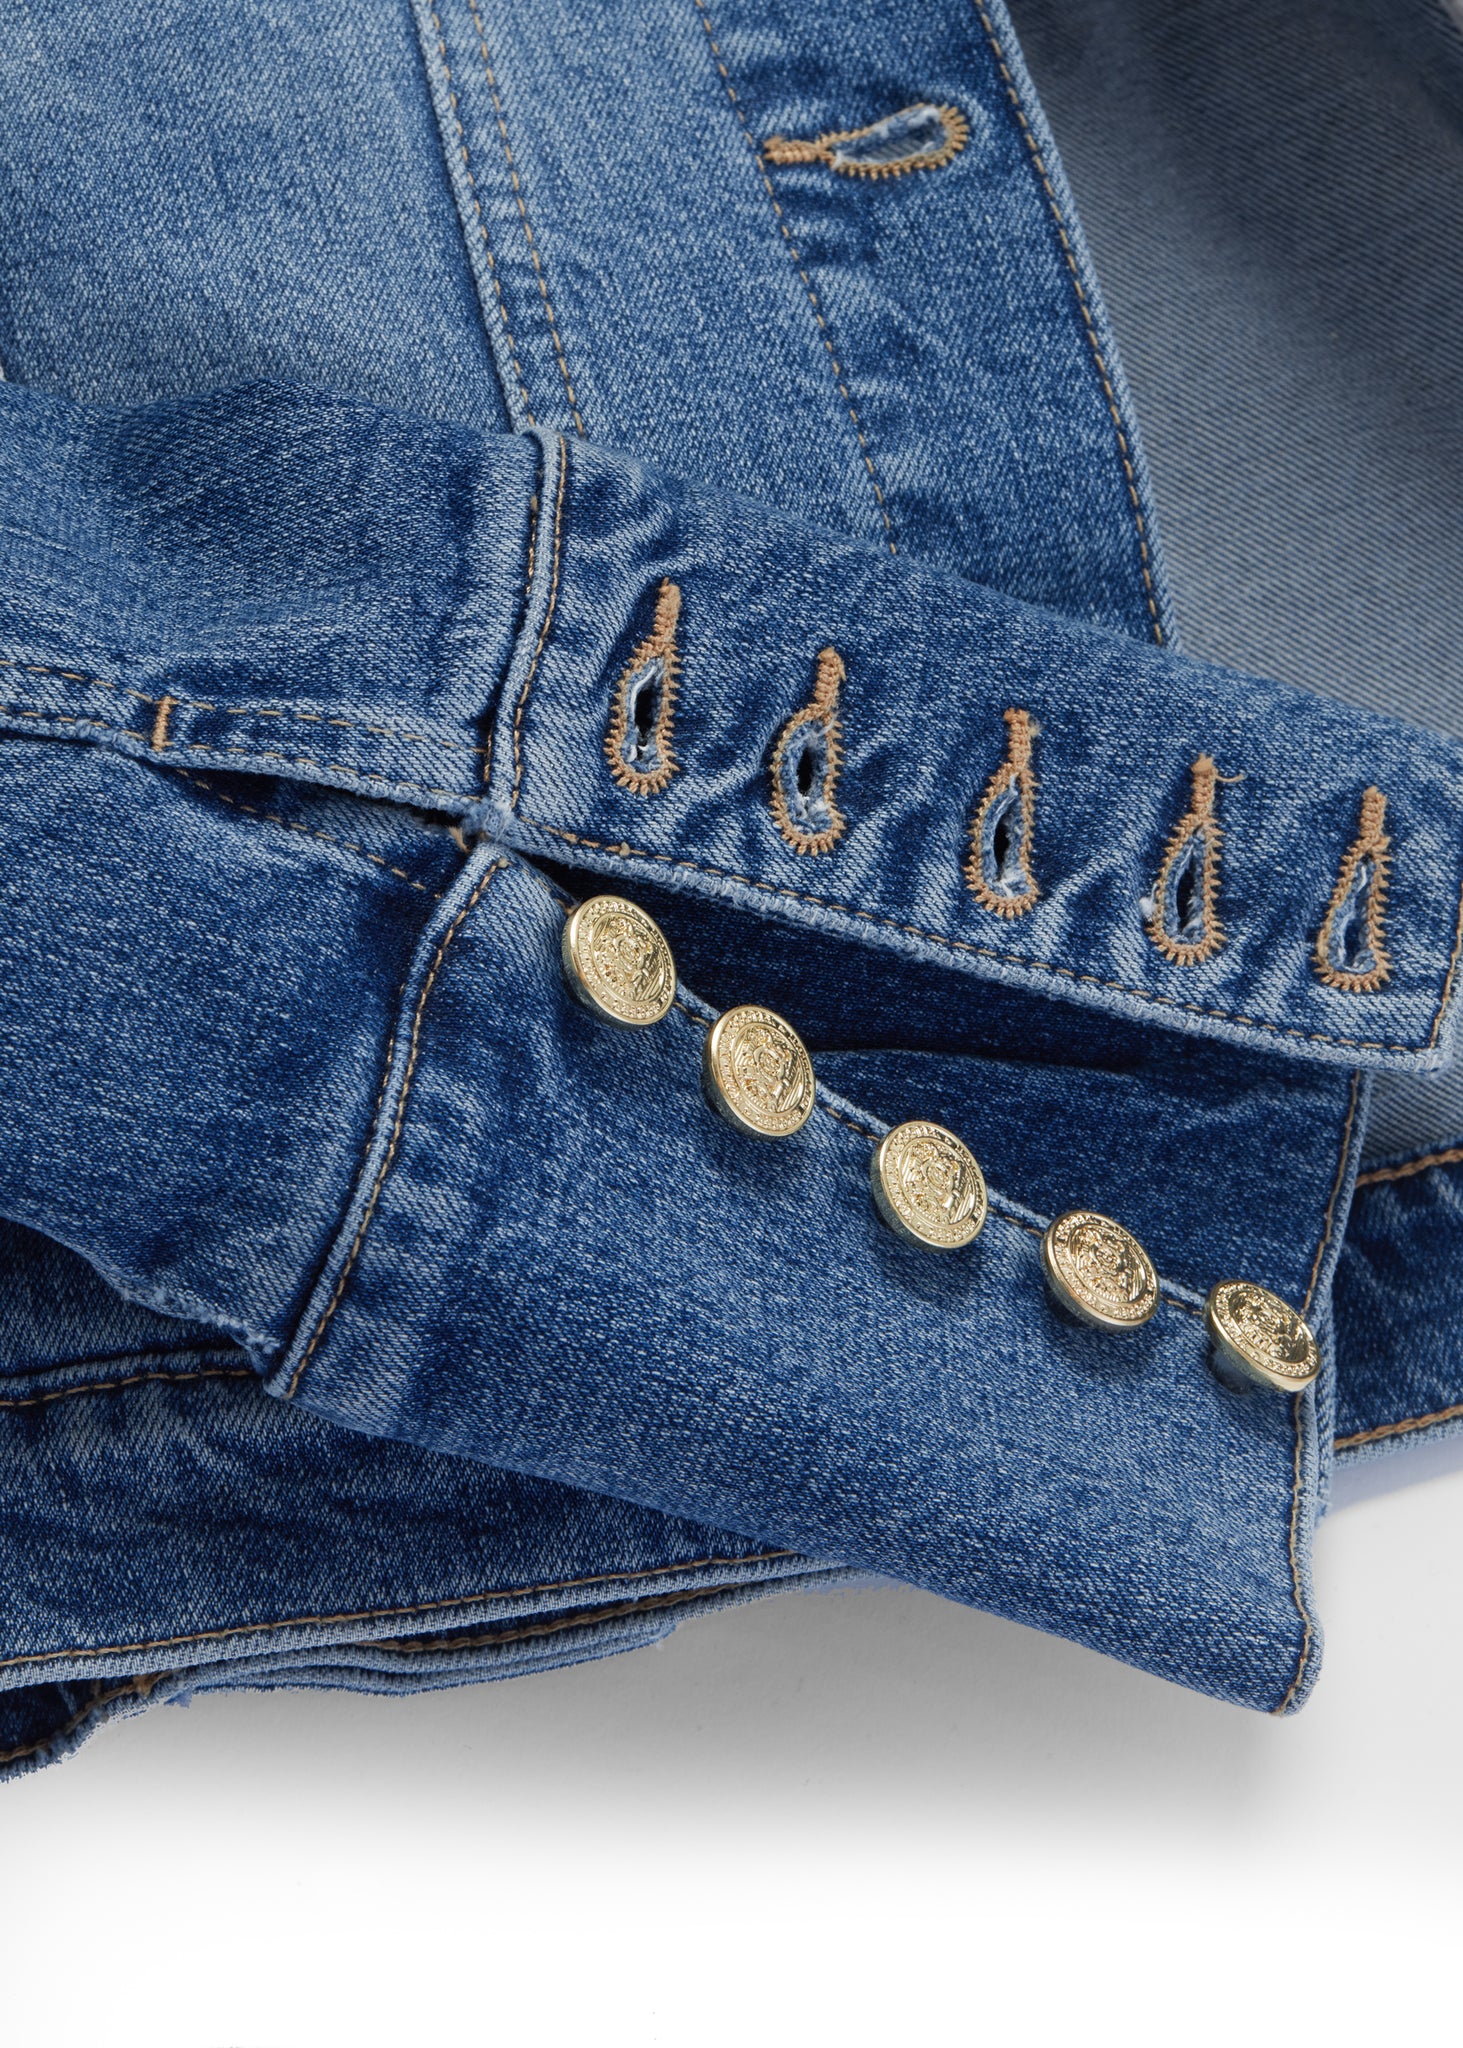 button cuff detail on classic indigo denim jacket waist length with gold buttons on front, pockets and cuffs with holland cooper embroidery on back